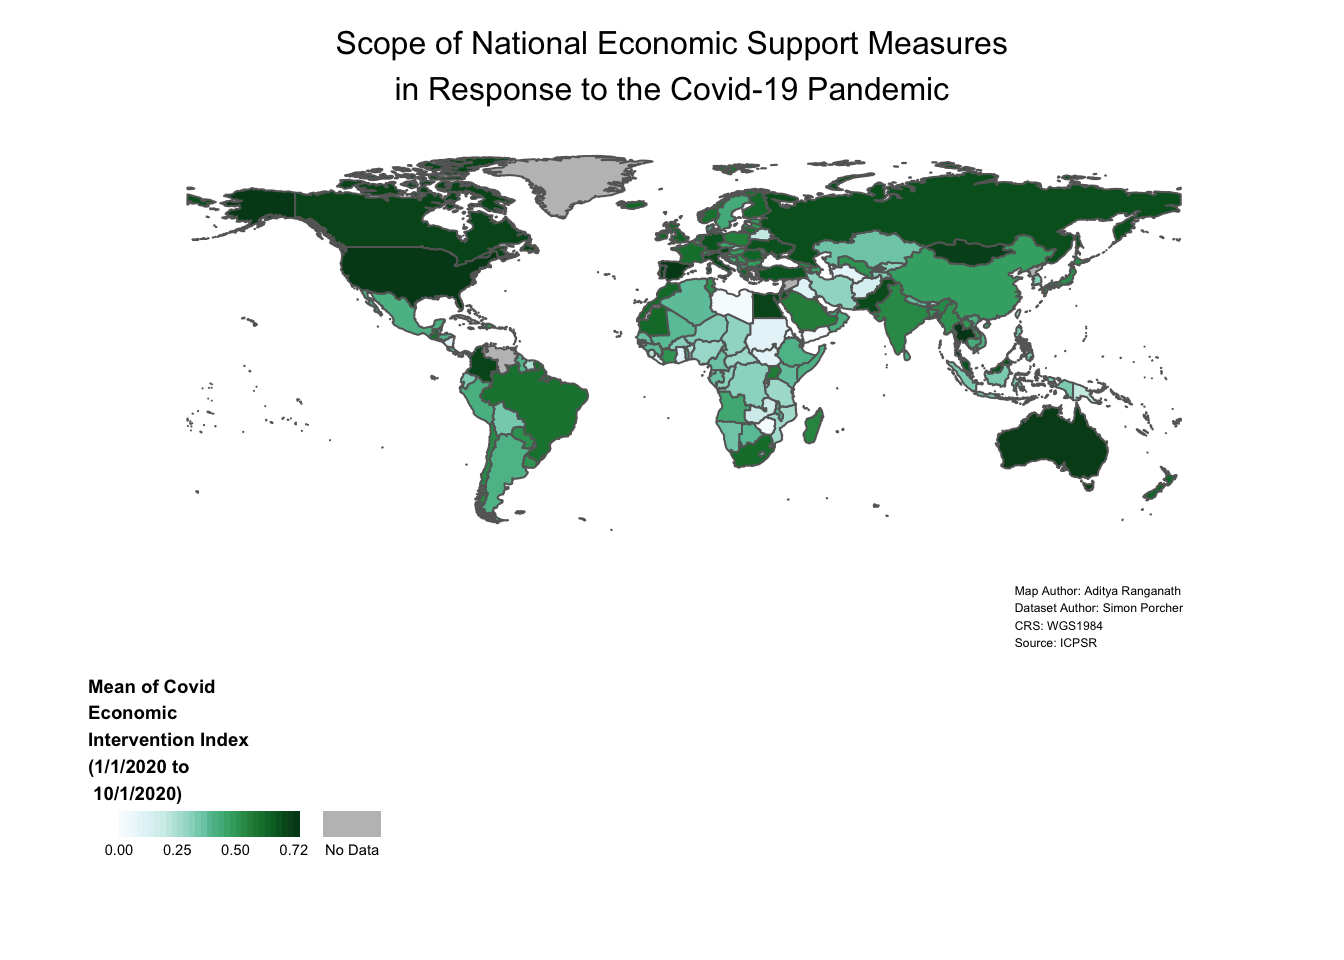 Choropleth world map showing variation in country-level average of covid economic intervention index; green color scheme ranging from lighter shades of green to represent lower values of the index and darker shades of green to represent higher values; countries without data are filled in with gray The map legend is a horizontal bar that displays values using a continuous color gradient with custom-chosen numbers arrayed below the gradient to help inform the viewer about the data distribution. The legend is displayed on the bottom-left of the map below and to the left of South America and is titled 'Mean of Covid Economic Intervention Index (1/1/2020 to 10/1/2020)'; the legend title is in bold and placed over the horizontal legend bar. There is no map frame surrounding the map. The map's title is 'Scope of National Economic Support Measures in Response to the Covid-19 Pandemic', which is split into two lines and centered at the top of the map above the northern-most countries. The map credits are split across four lines, and printed on the bottom-right of the map below Australia and New Zealand.